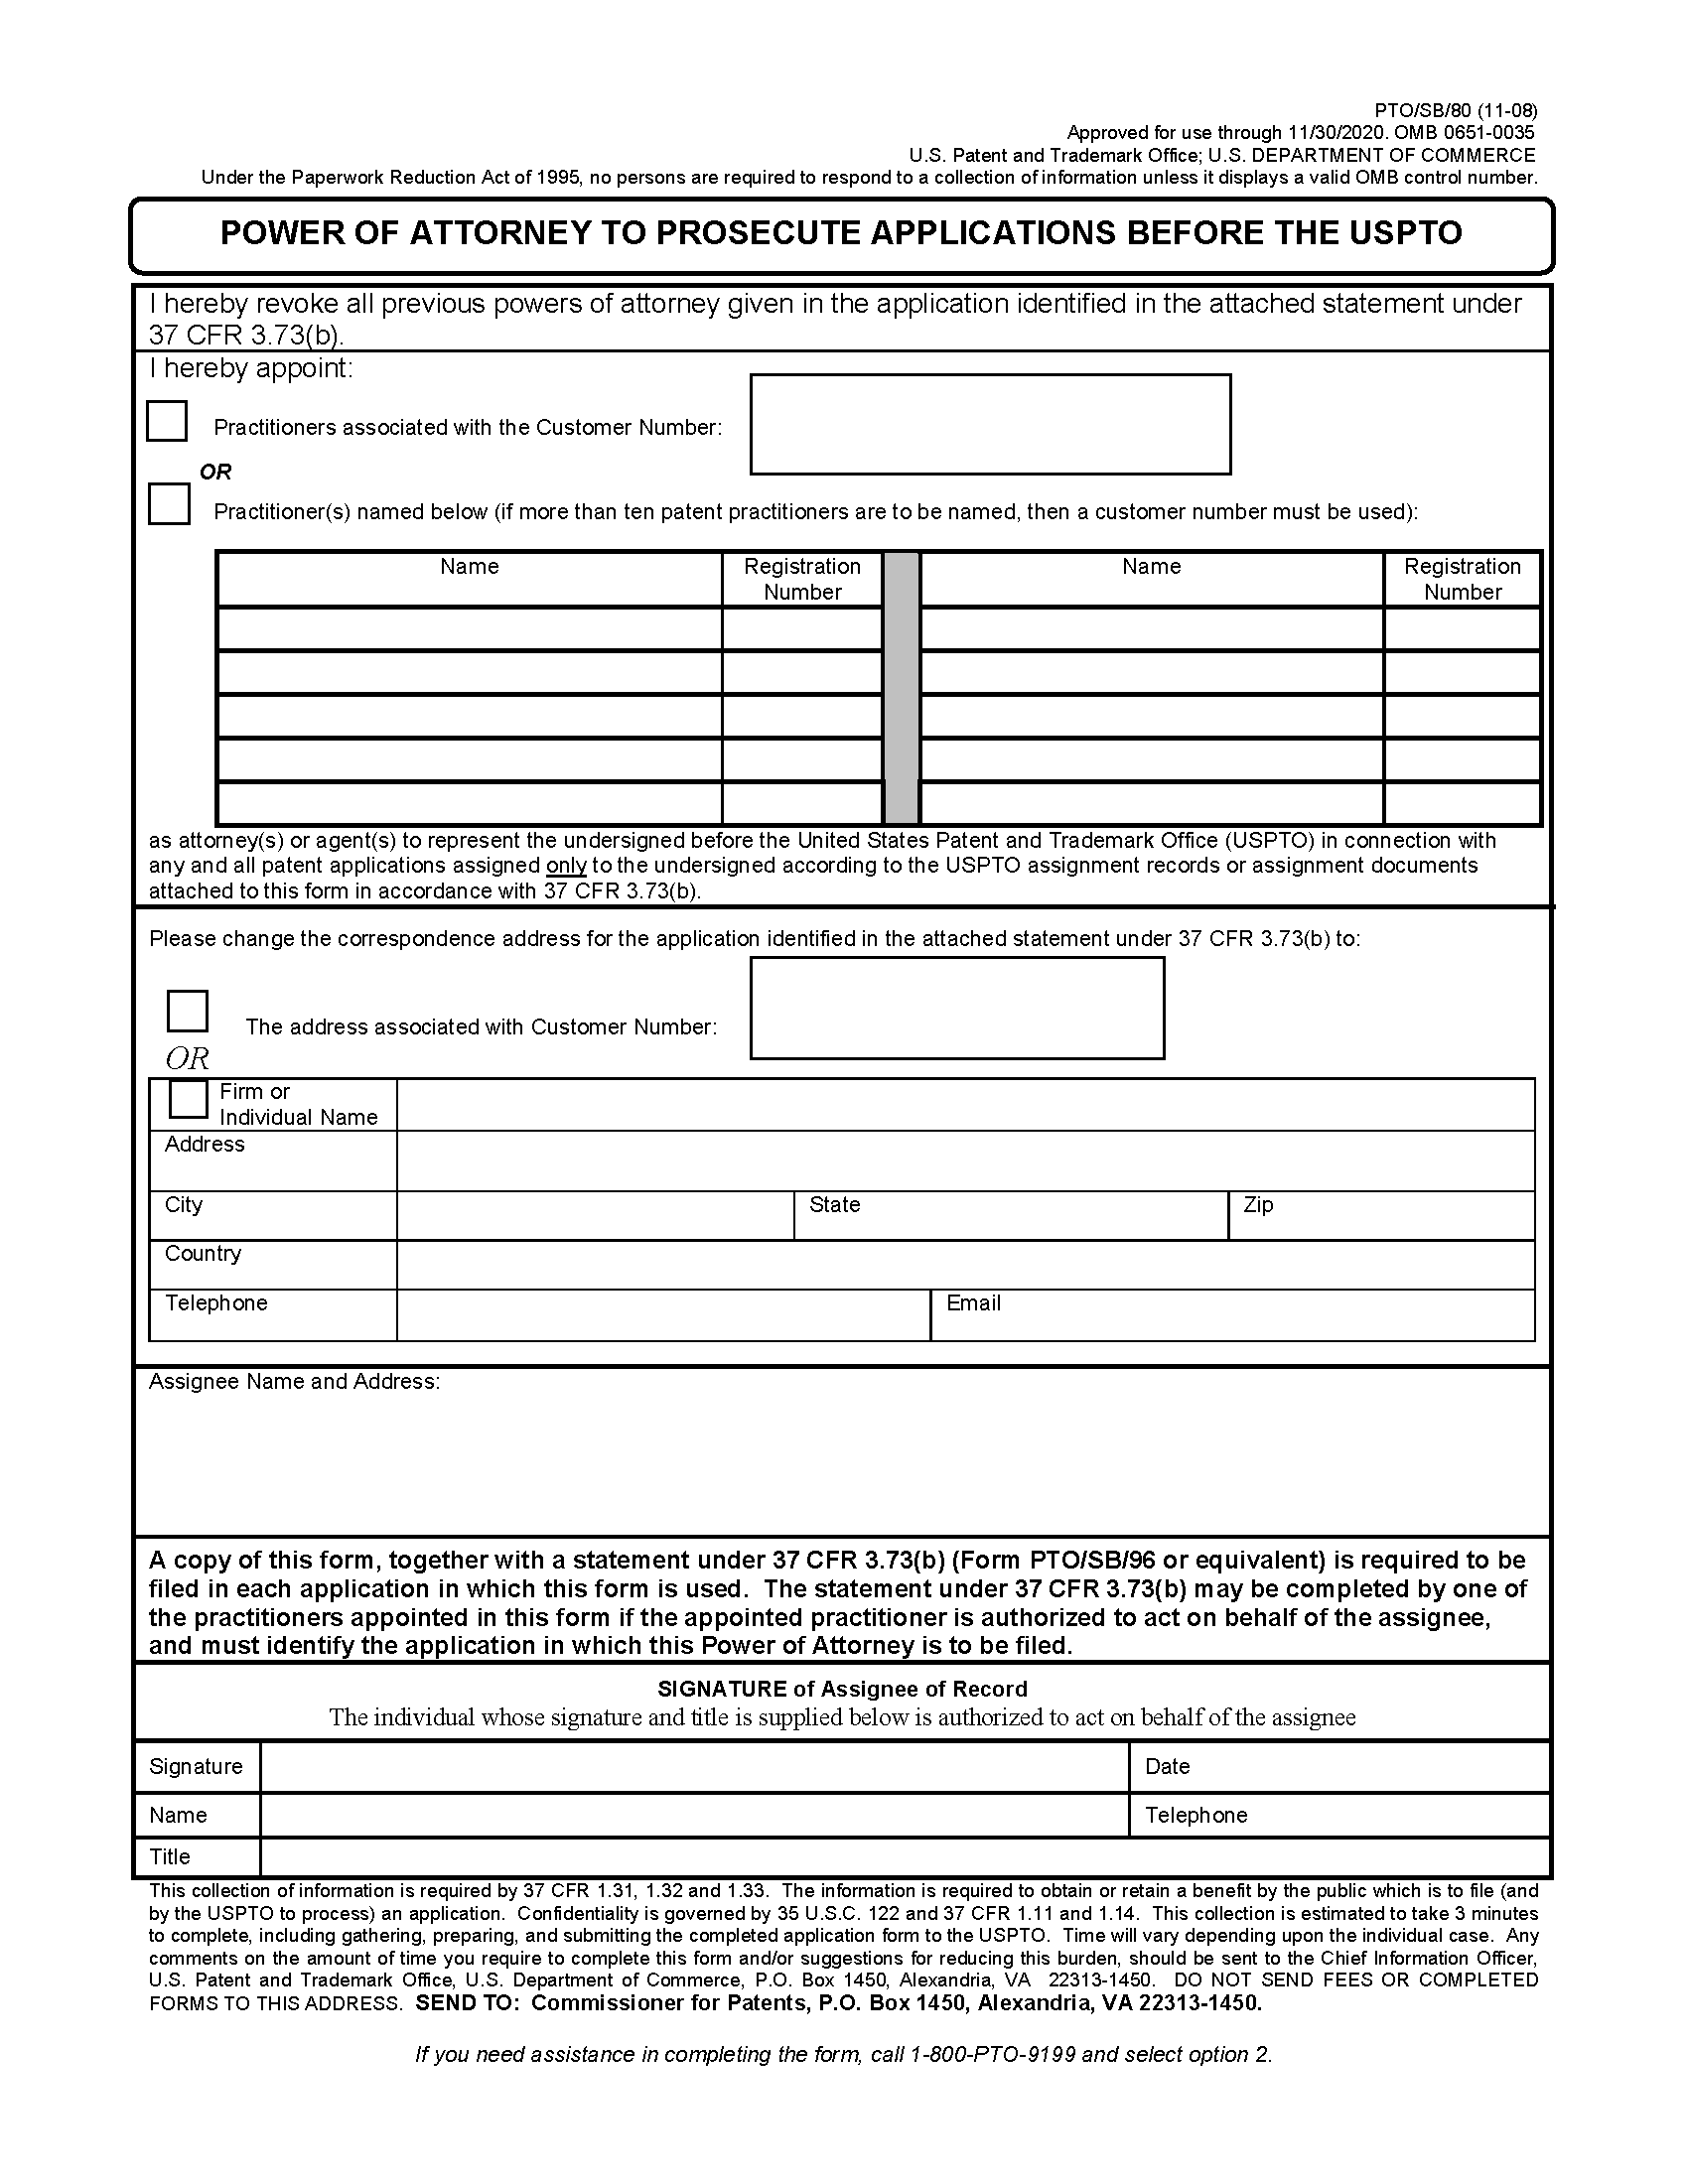 Form PTO/SB/80 Power of Attorney To Prosecute Applications Before the USPTO